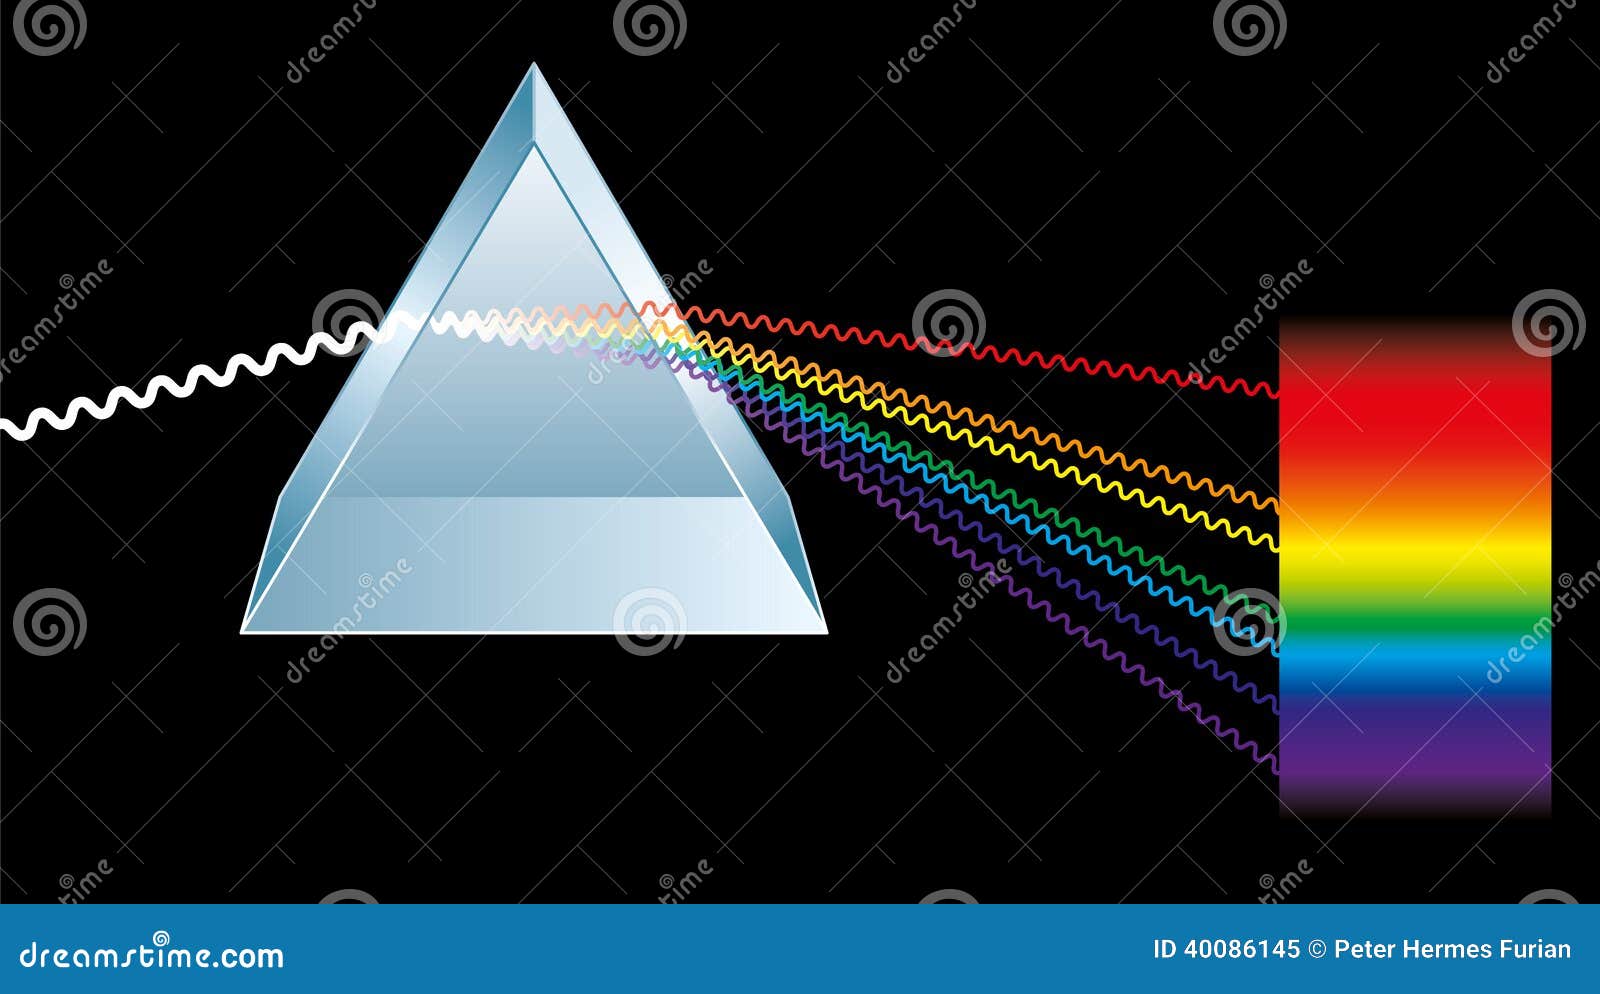 triangular prism breaks light into spectral colors